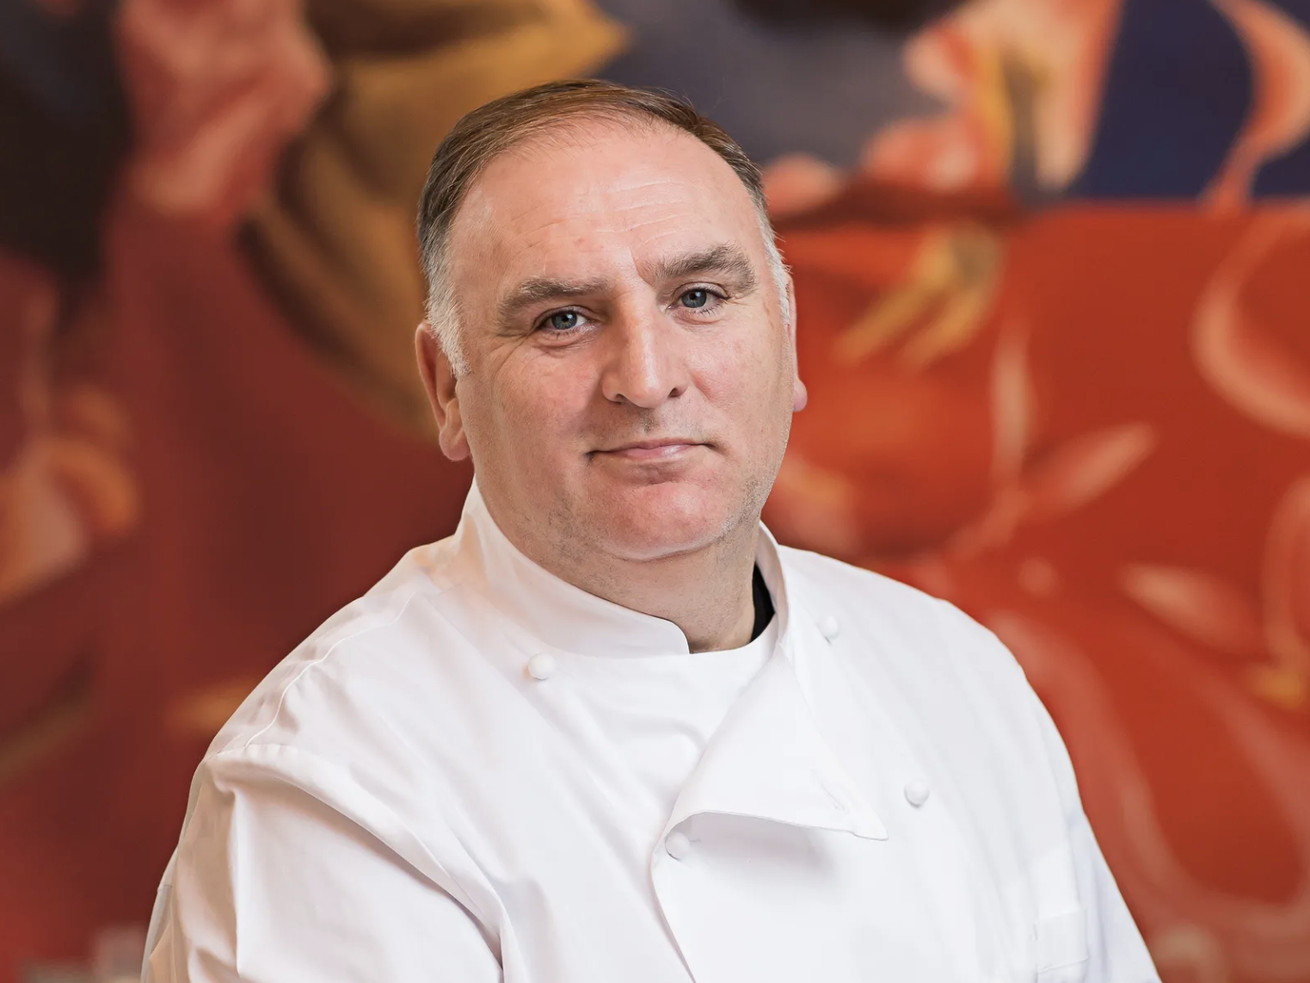 Jose Andres, Somehow Not Busy Enough, Is Launching His Own Media Company